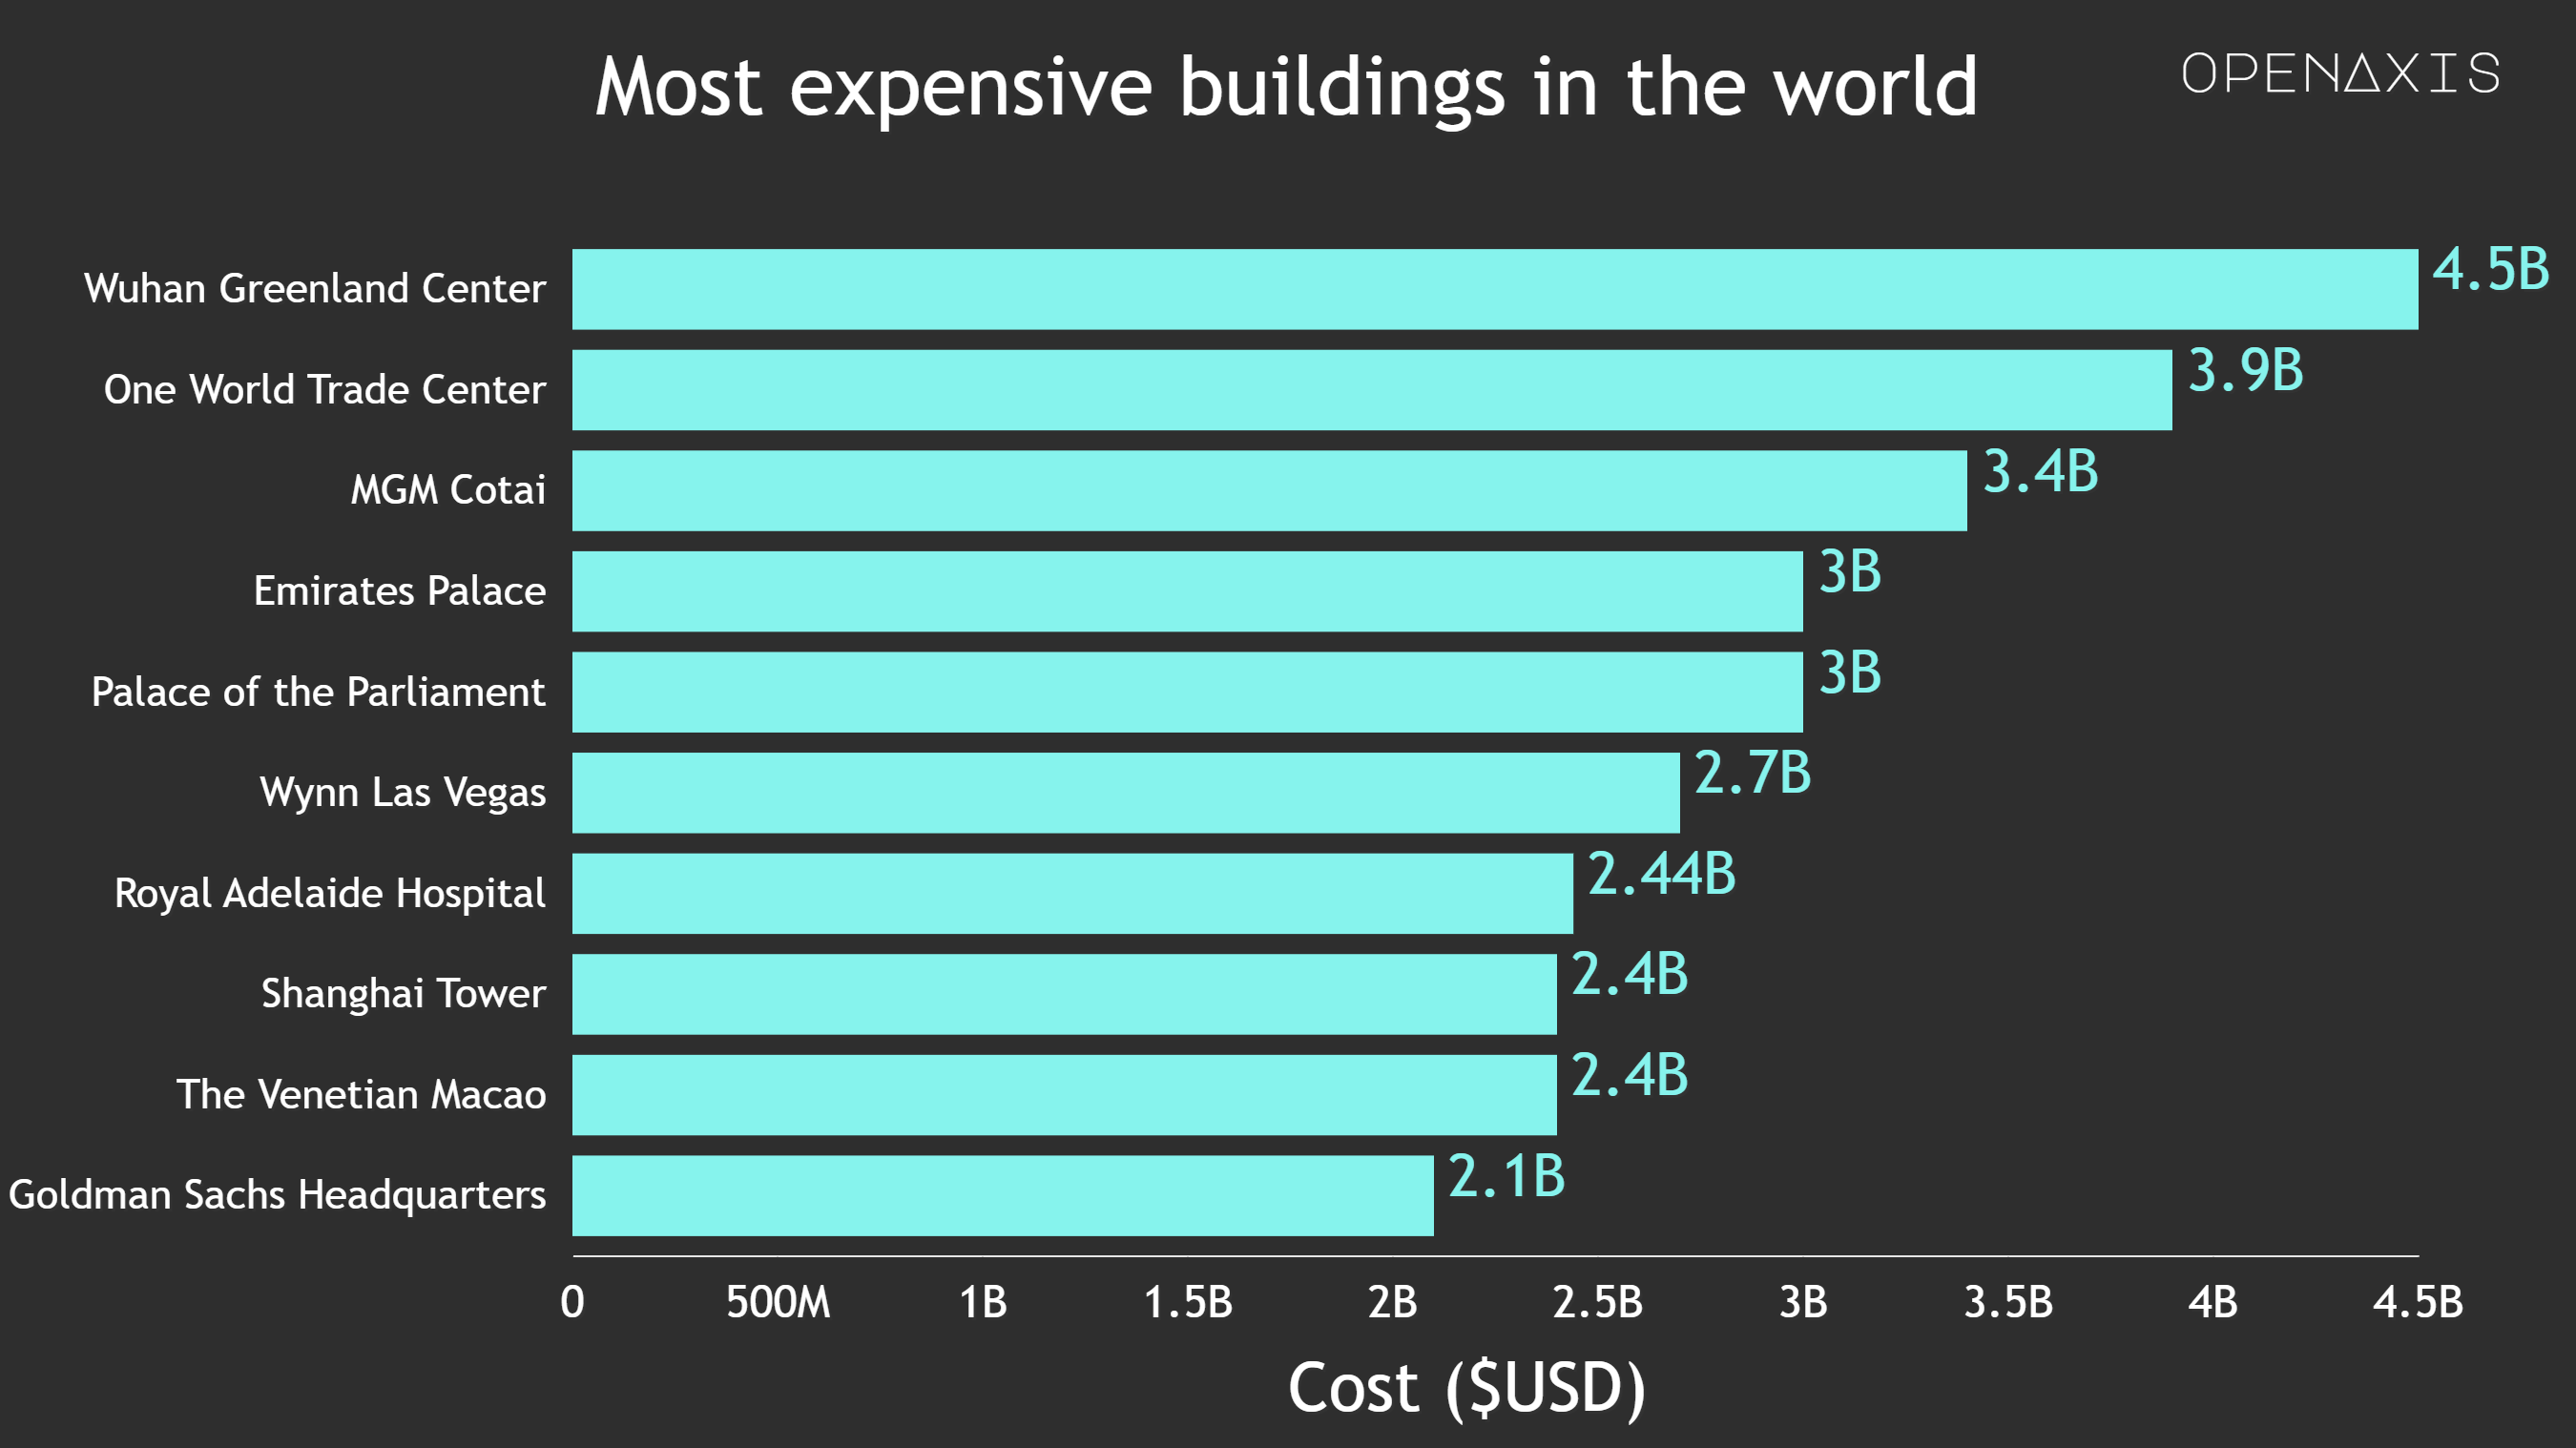 <p>The tallest buildings in the world are not always the most expensive. Here is a list of the most expensive buildings in the world, completed or under construction.</p><p><br /></p><p>The Palace of Parliament in Bucharest, Romania, began construction in the 1980s and still is in the top 5 of the most expensive buildings in the world!</p><p><br /></p><p><span data-index="0" data-denotation-char data-id="0" data-value="&lt;a href=&quot;/search?q=%23infrastructure&quot; target=_self&gt;#infrastructure" data-link="/search?q=%23infrastructure">﻿<span contenteditable="false"><span></span><a href="/search?q=%23infrastructure" target="_self">#infrastructure</a></span>﻿</span> <span data-index="0" data-denotation-char data-id="0" data-value="&lt;a href=&quot;/search?q=%23construction&quot; target=_self&gt;#construction" data-link="/search?q=%23construction">﻿<span contenteditable="false"><span></span><a href="/search?q=%23construction" target="_self">#construction</a></span>﻿</span></p><p><br /></p><p>Source: <a href="/data/4028" target="_blank">Emporis</a></p><p><br /></p>